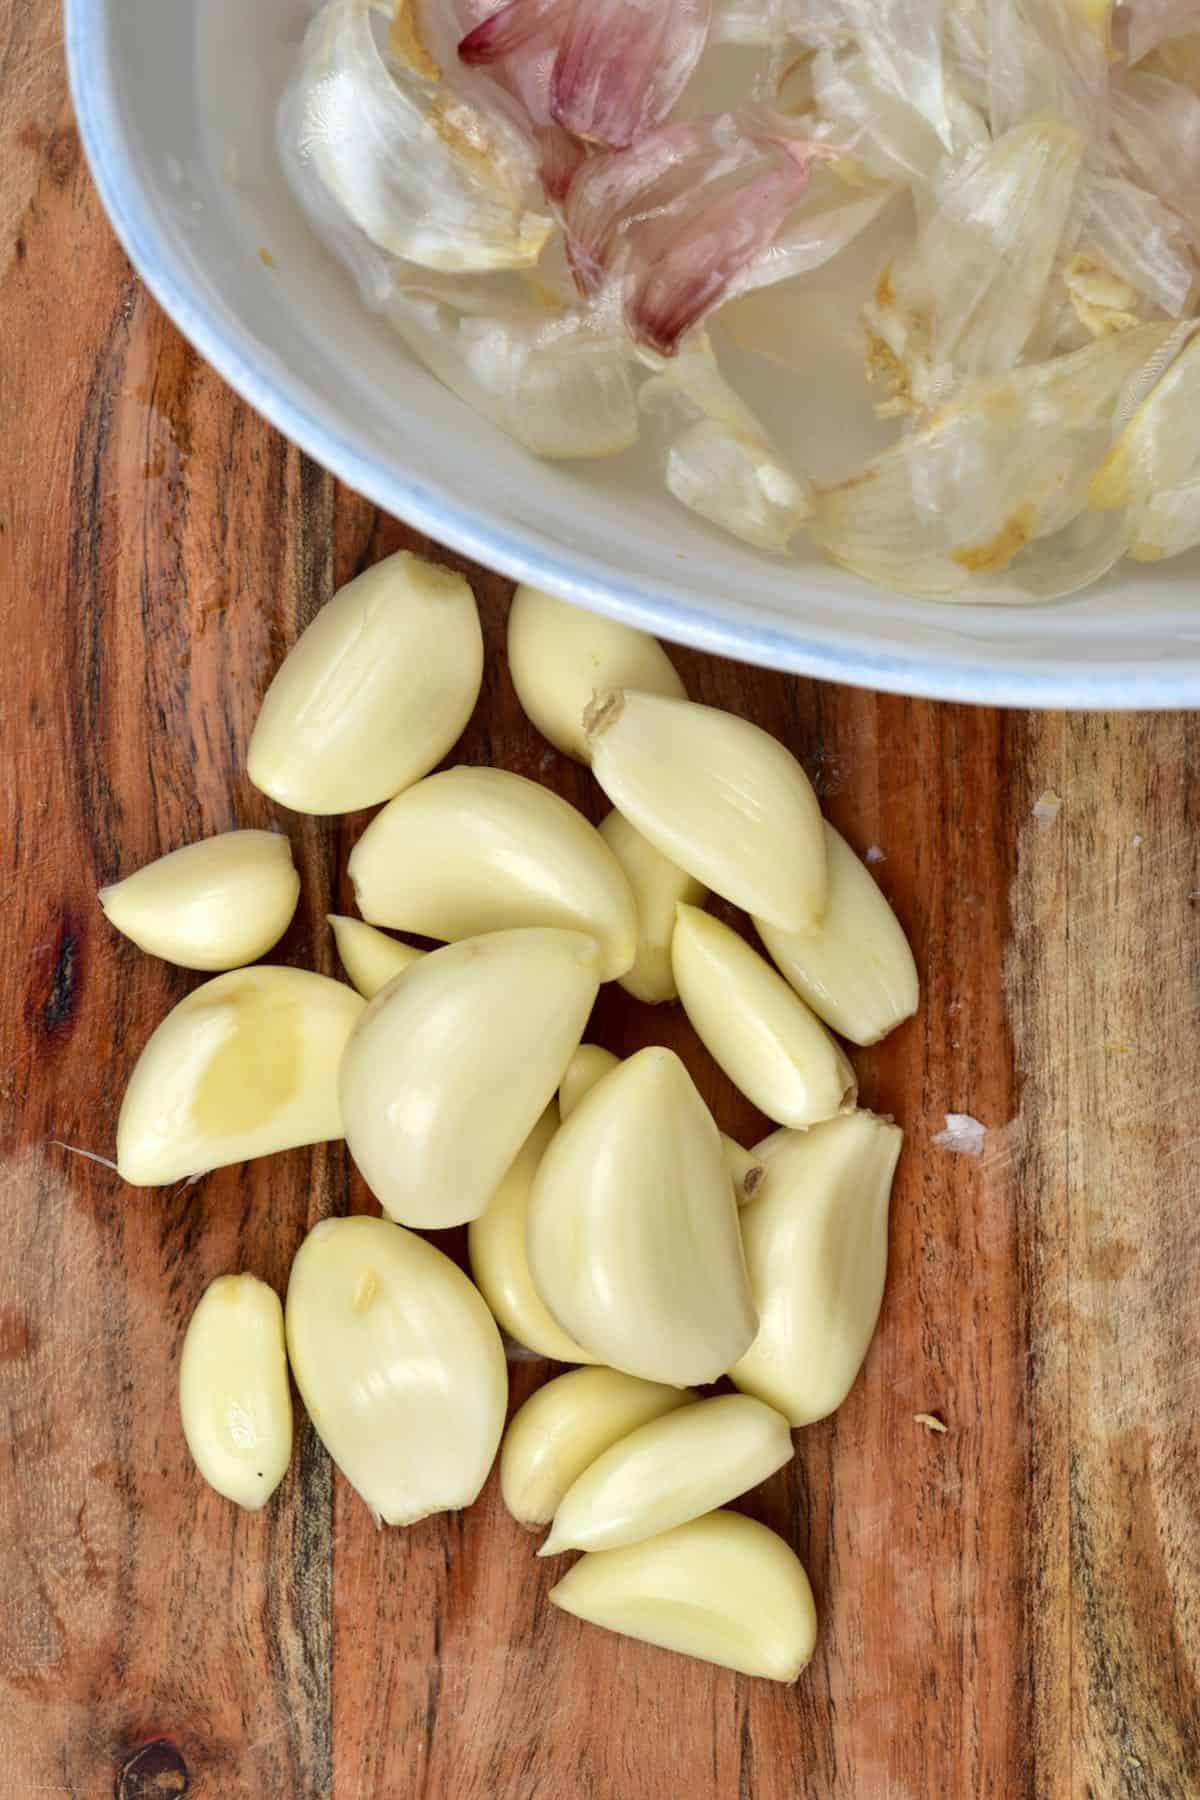 Best Tool for Prepping Garlic - Test